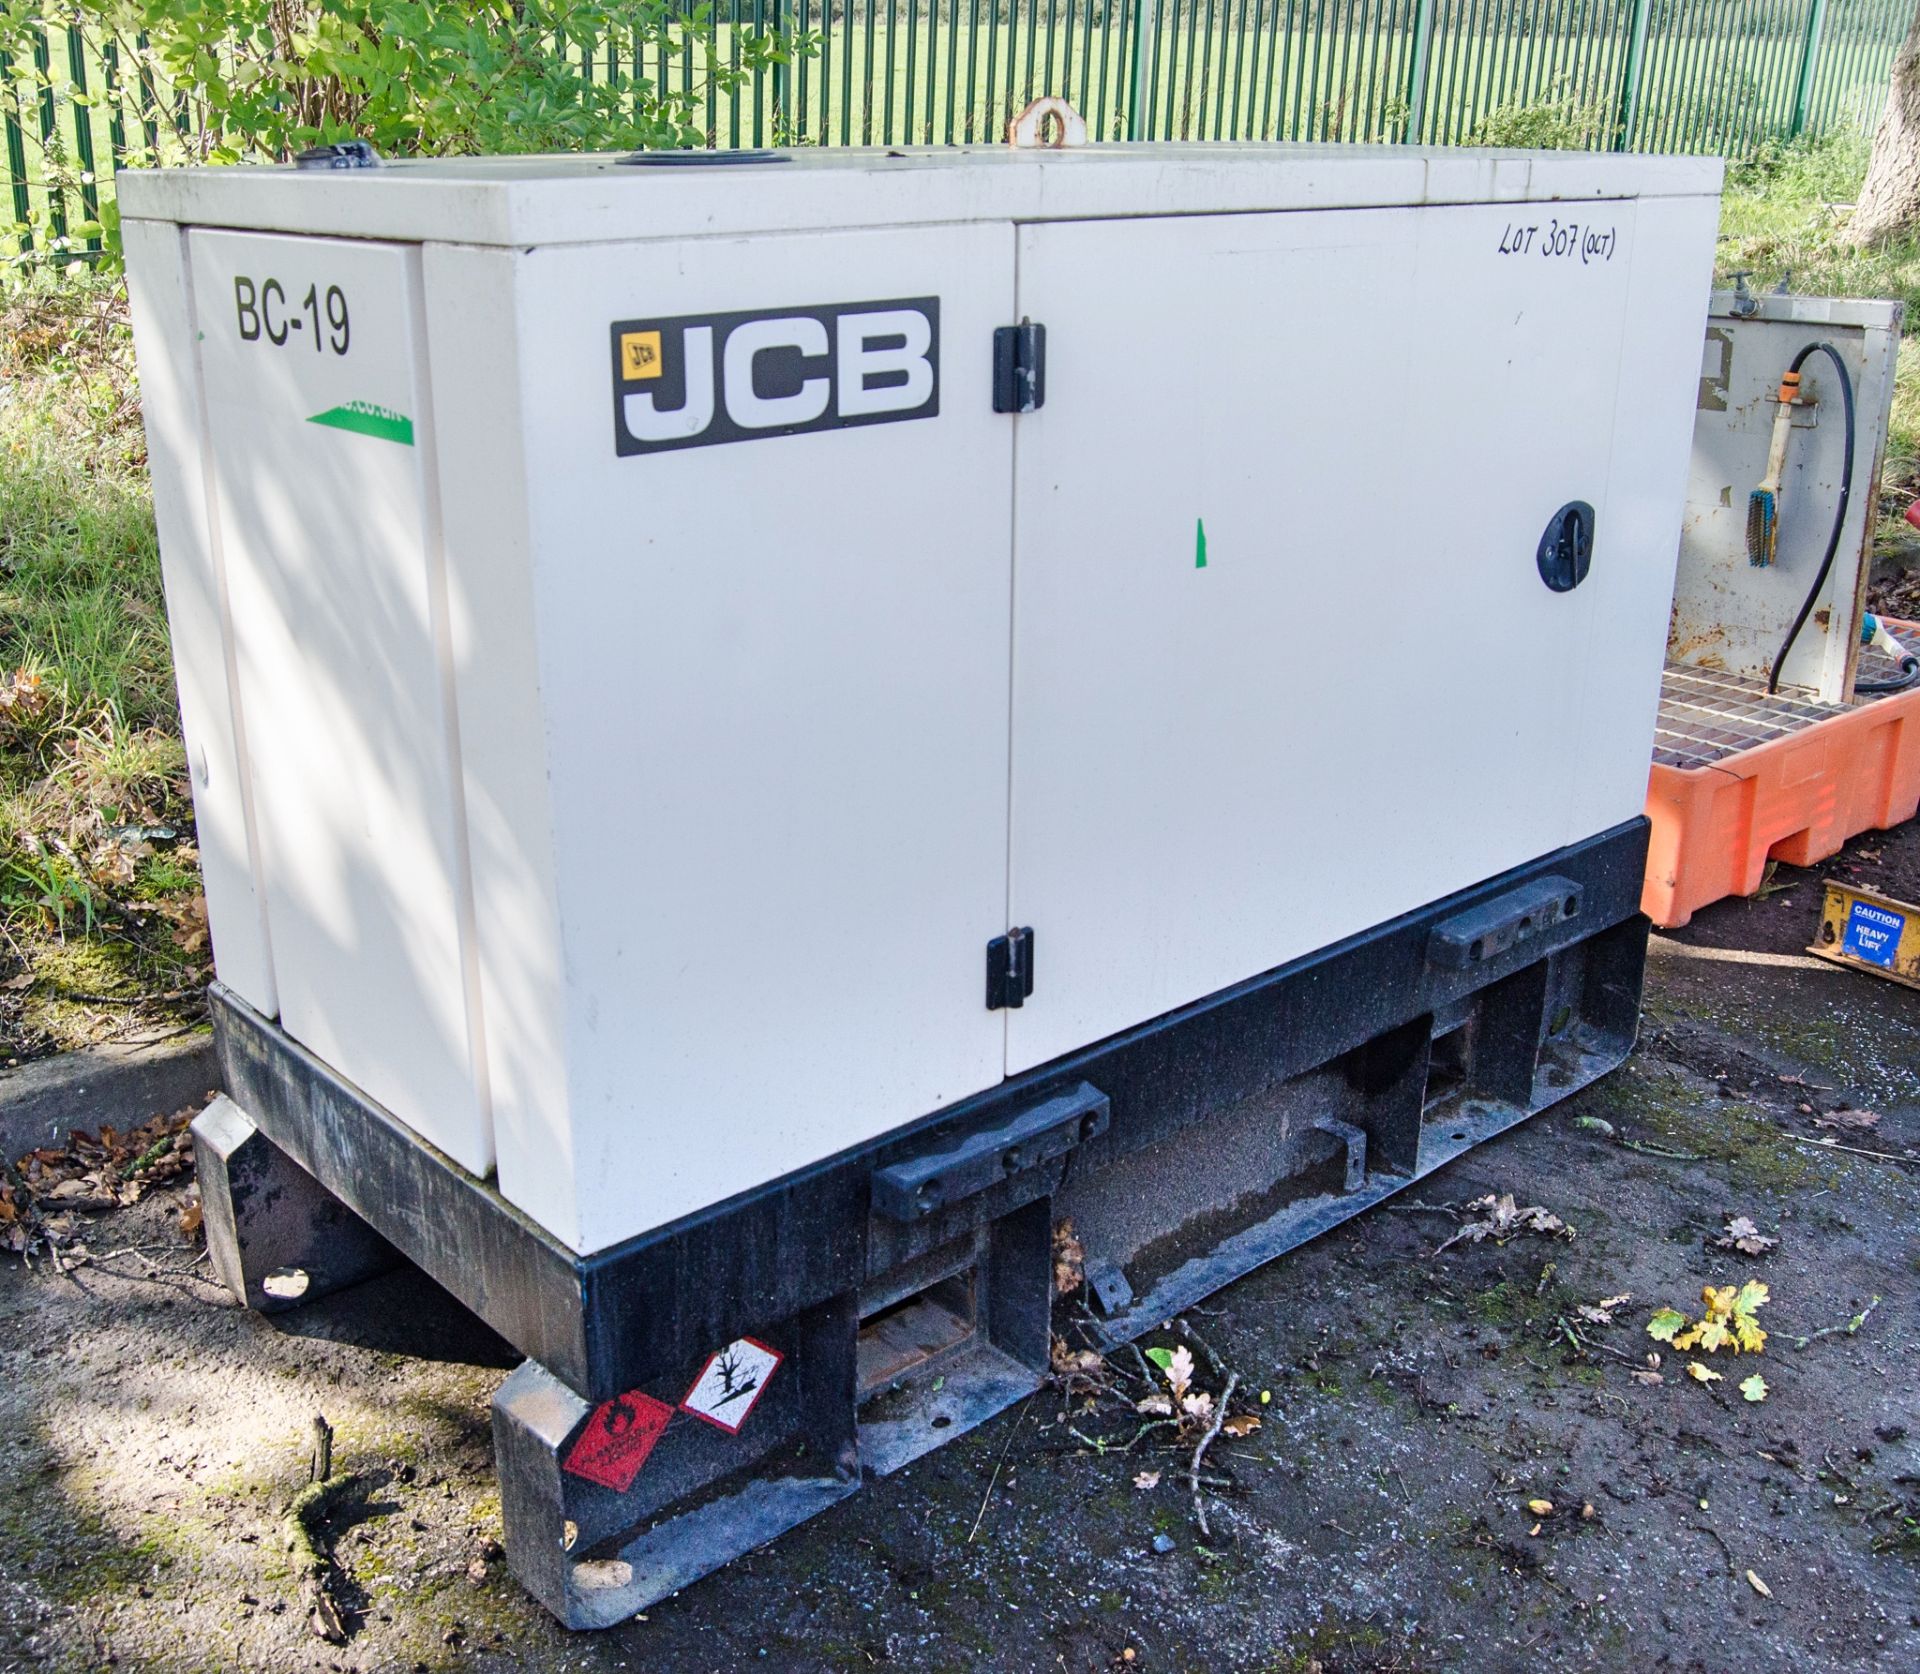 JCB 19 kva diesel driven generator Year: 2017 S/N: 2481889 Recorded Hours: 5290 A775446 - Image 2 of 5